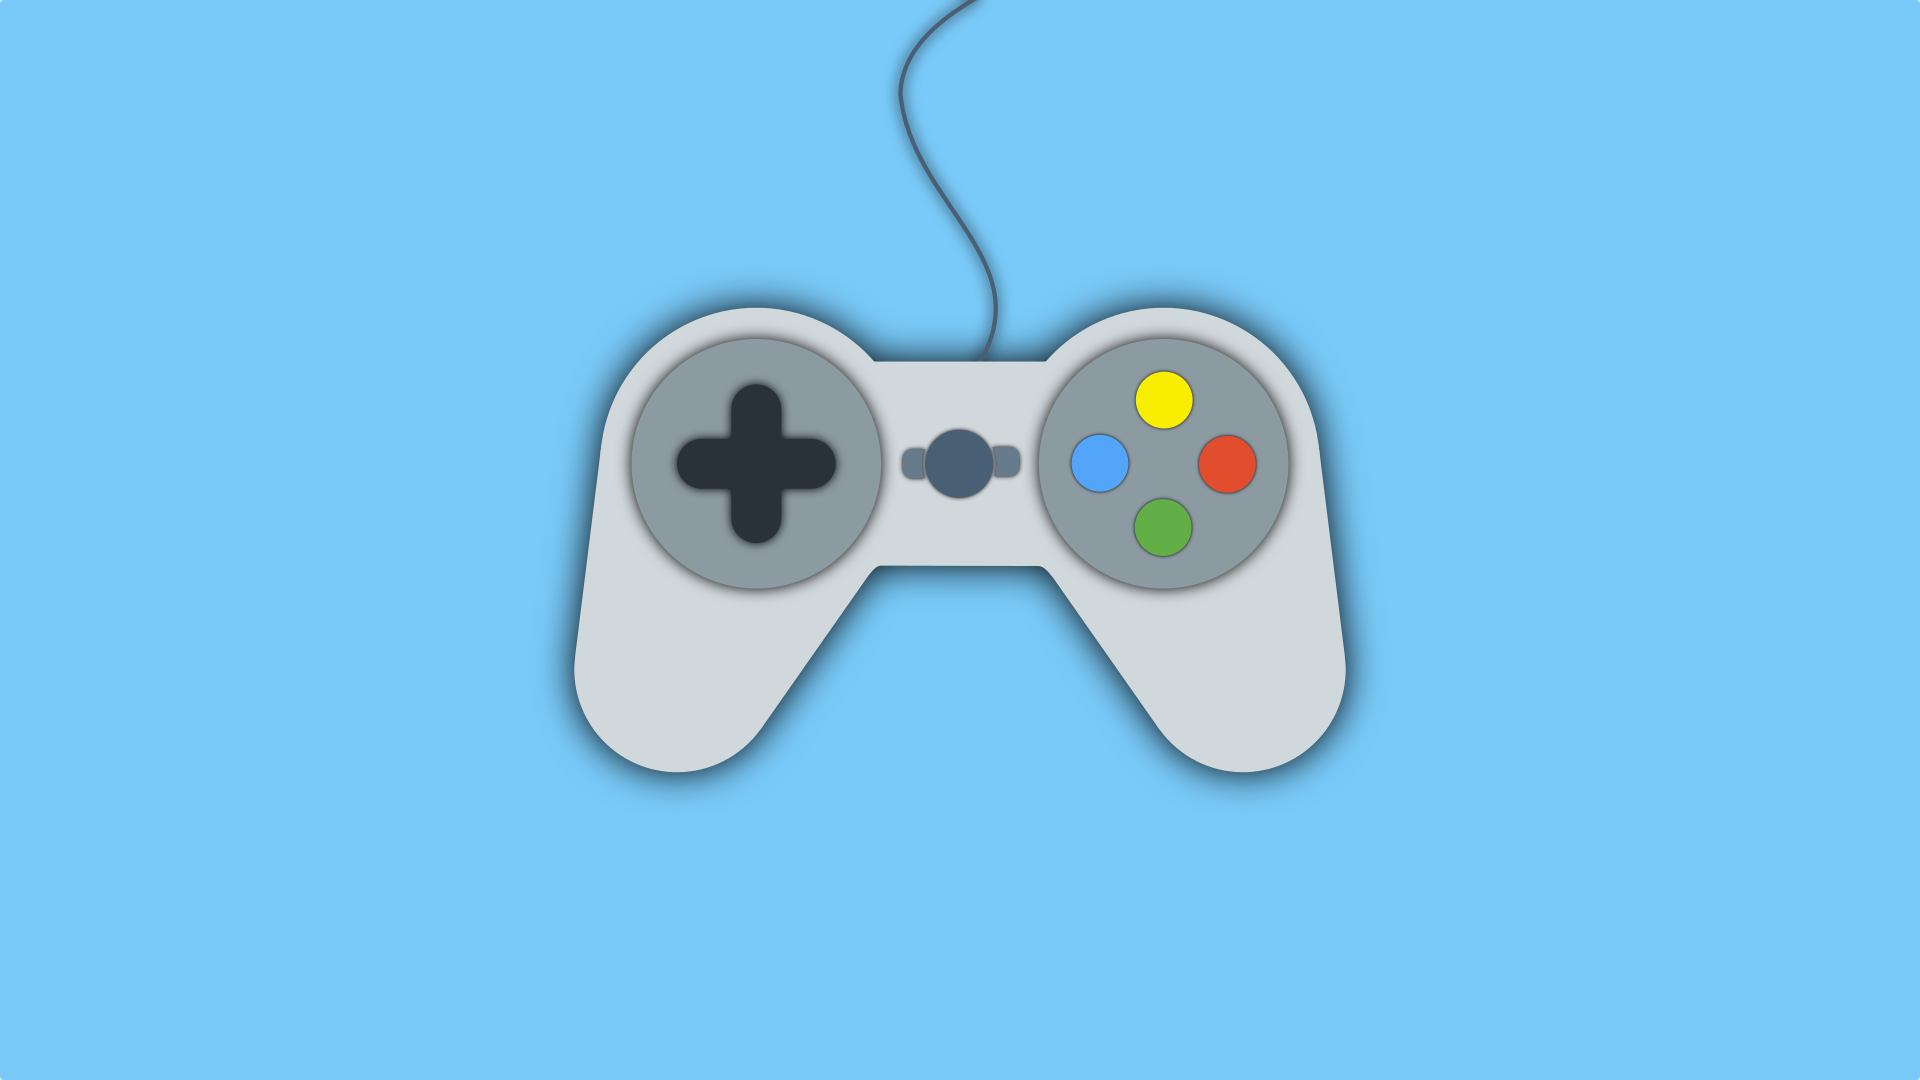 Illustration of a video game controller on a blue background.